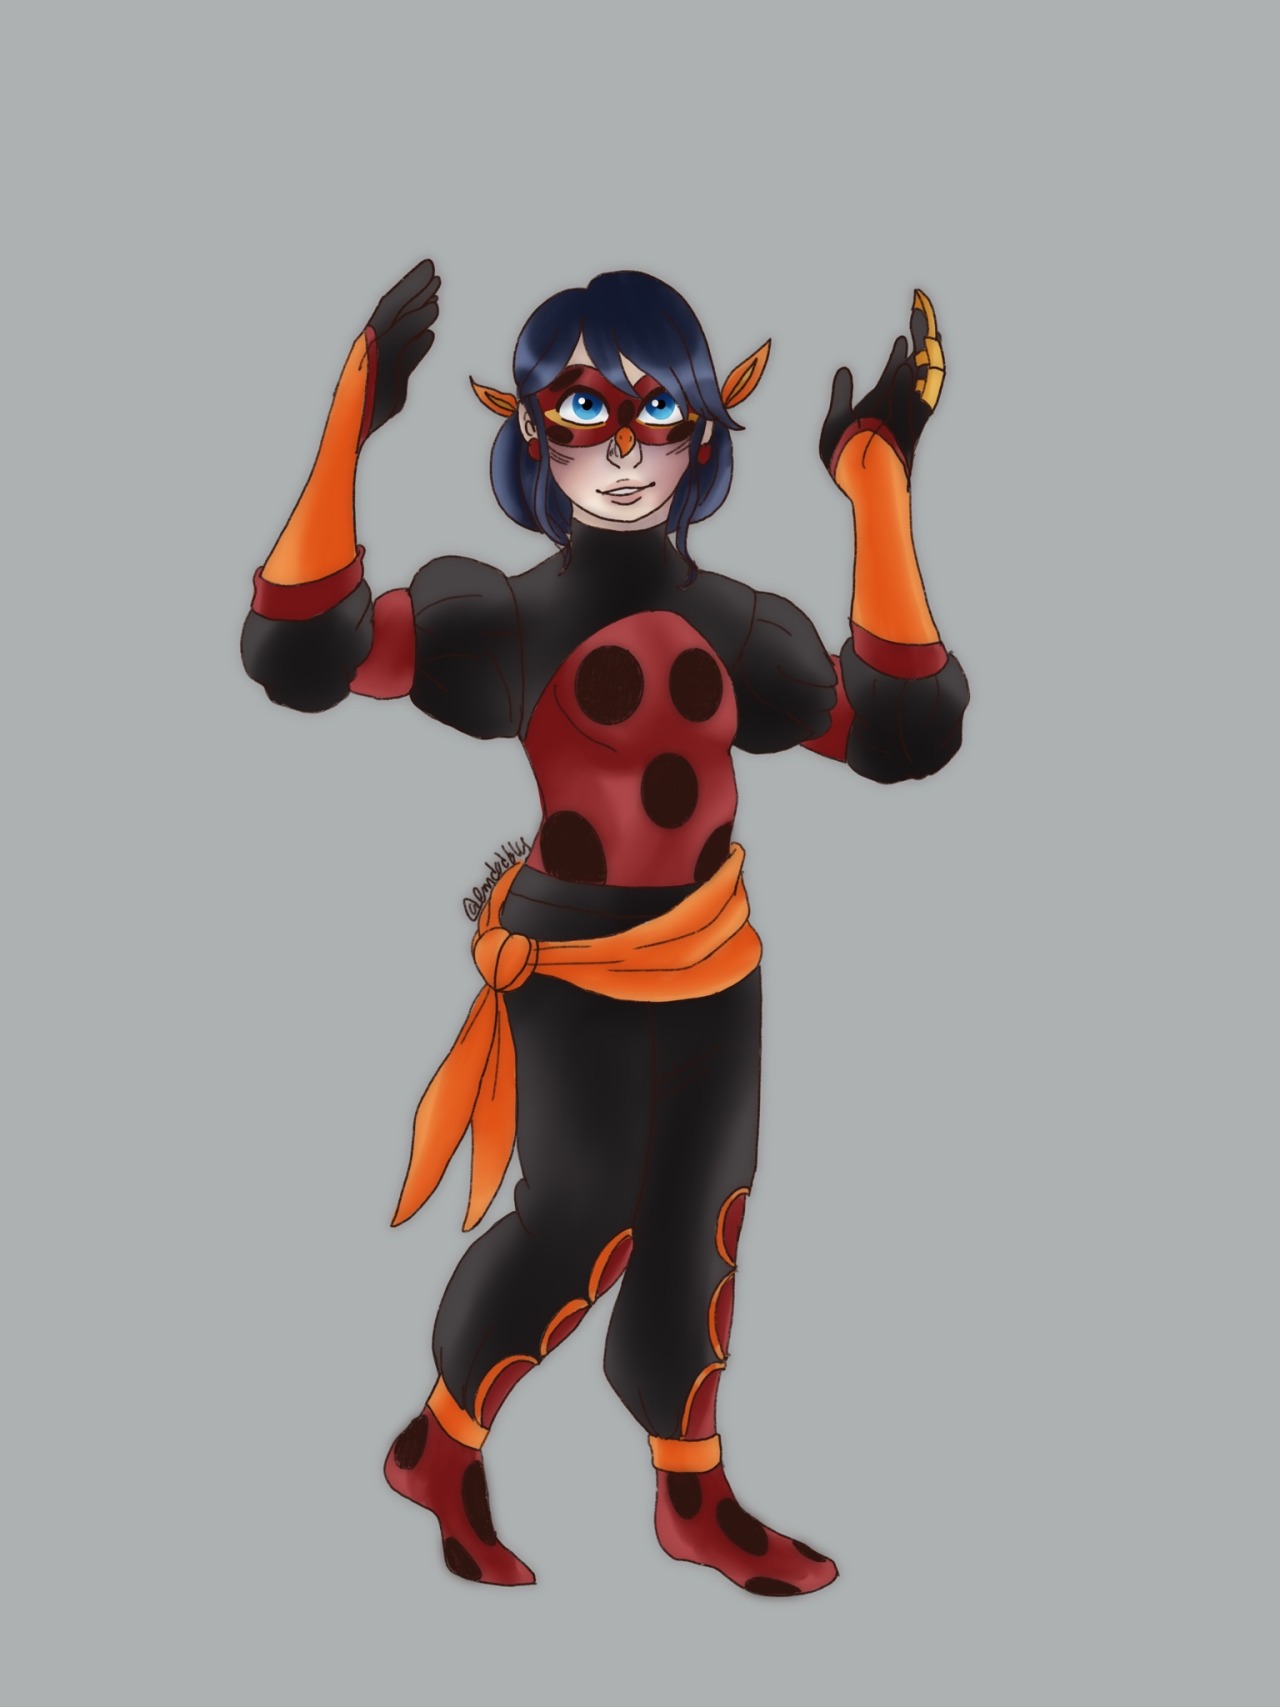 Ladybug with the rooster miraculous, I like the... - Art blog Of R0W